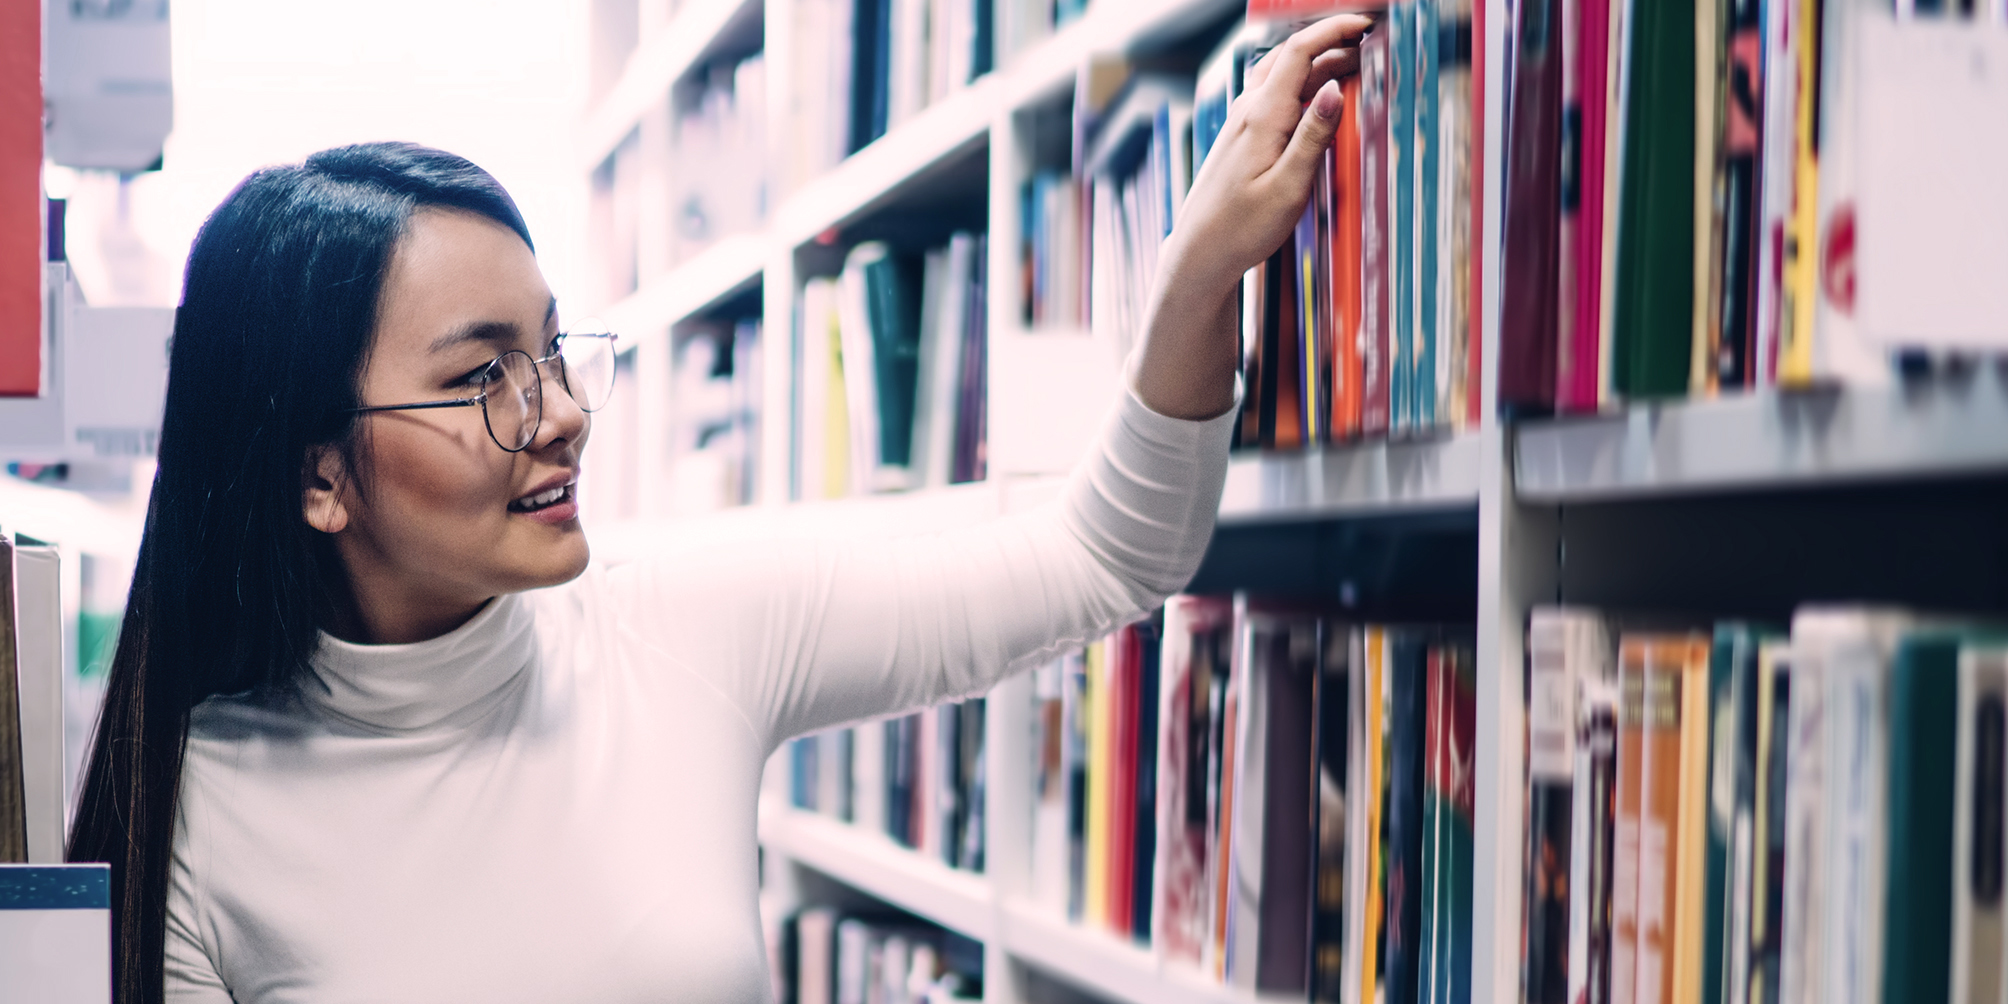 A woman with black hair and glasses selects a book from a library shelf.